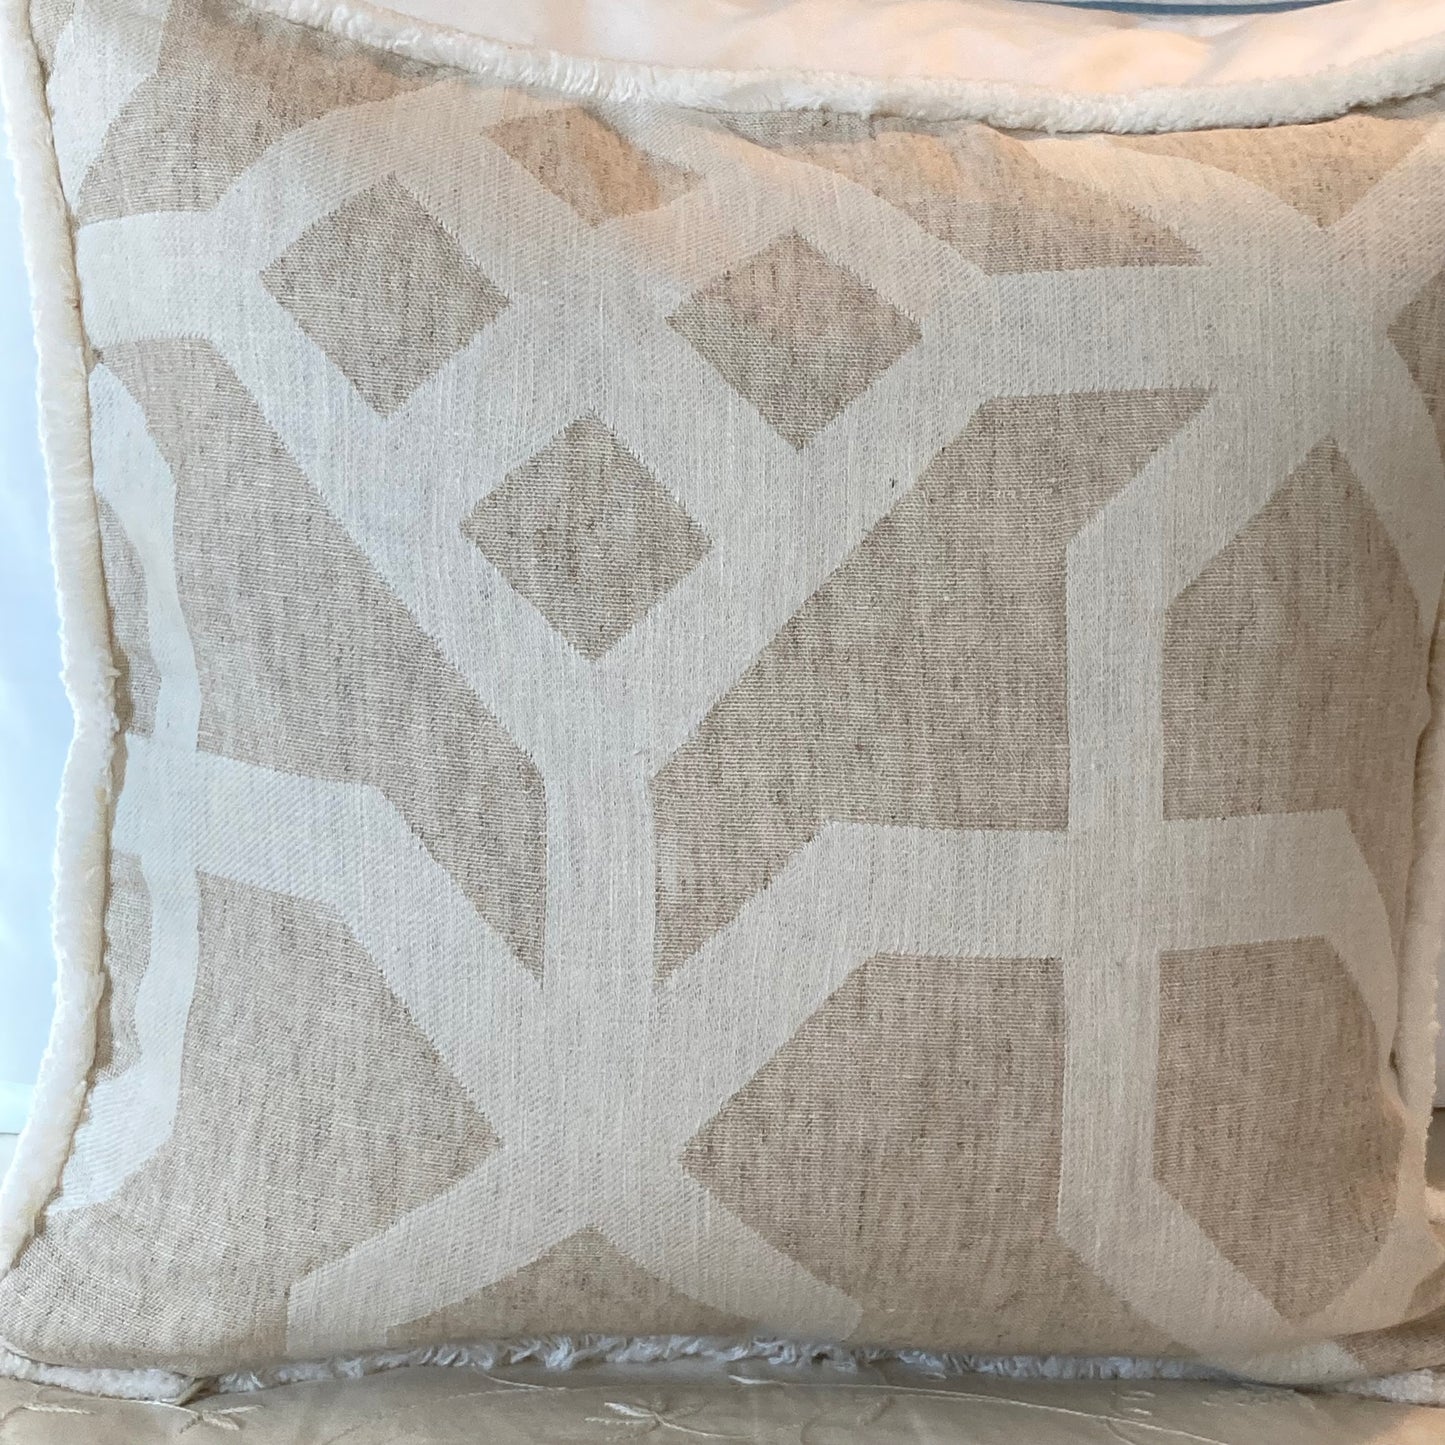 Dramatic White Coral Print on Aqua 16 X 16 Square Designer Pillow with Down Feather Insert